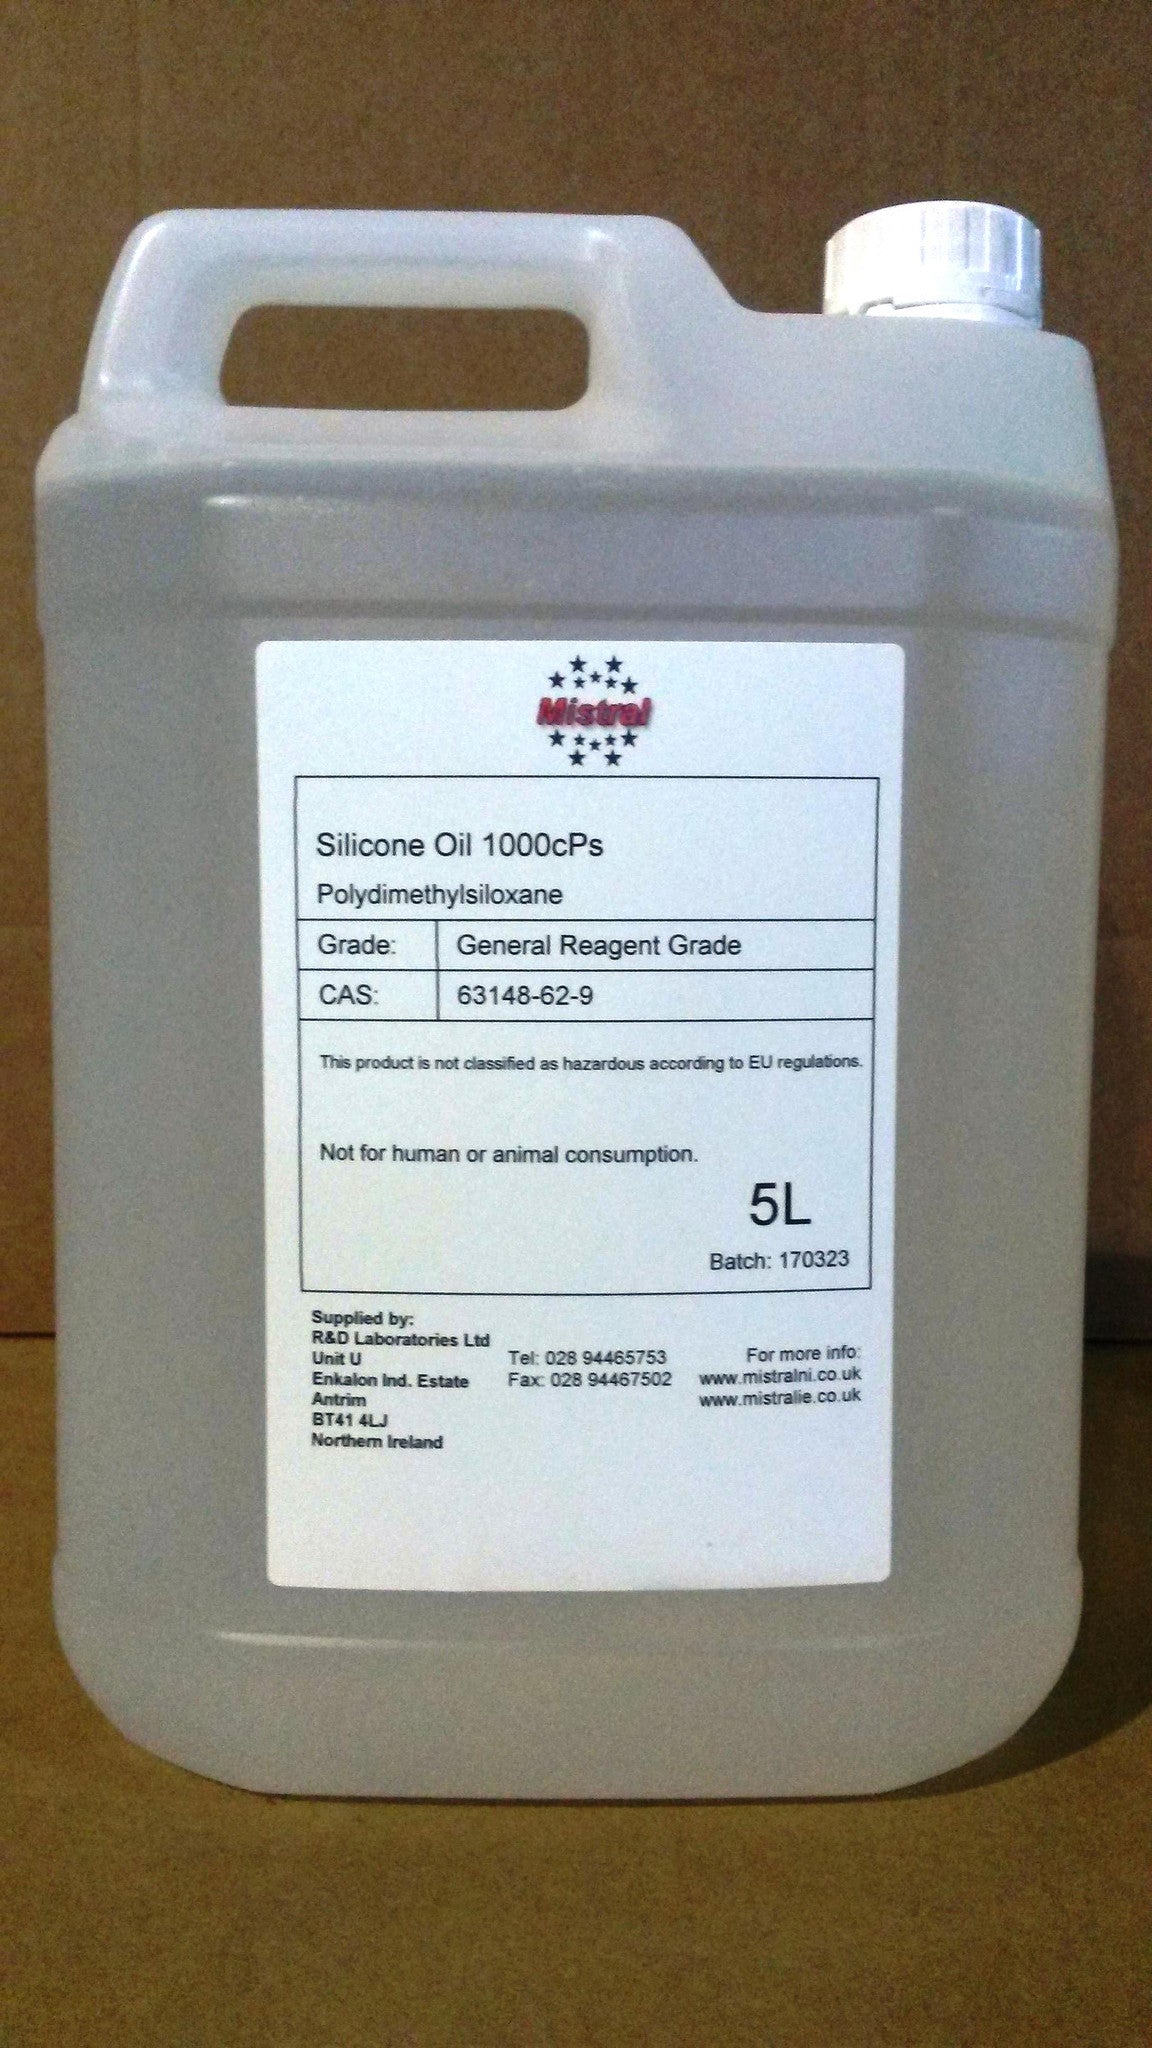 Silicone Oil TPD-201 (5cst)